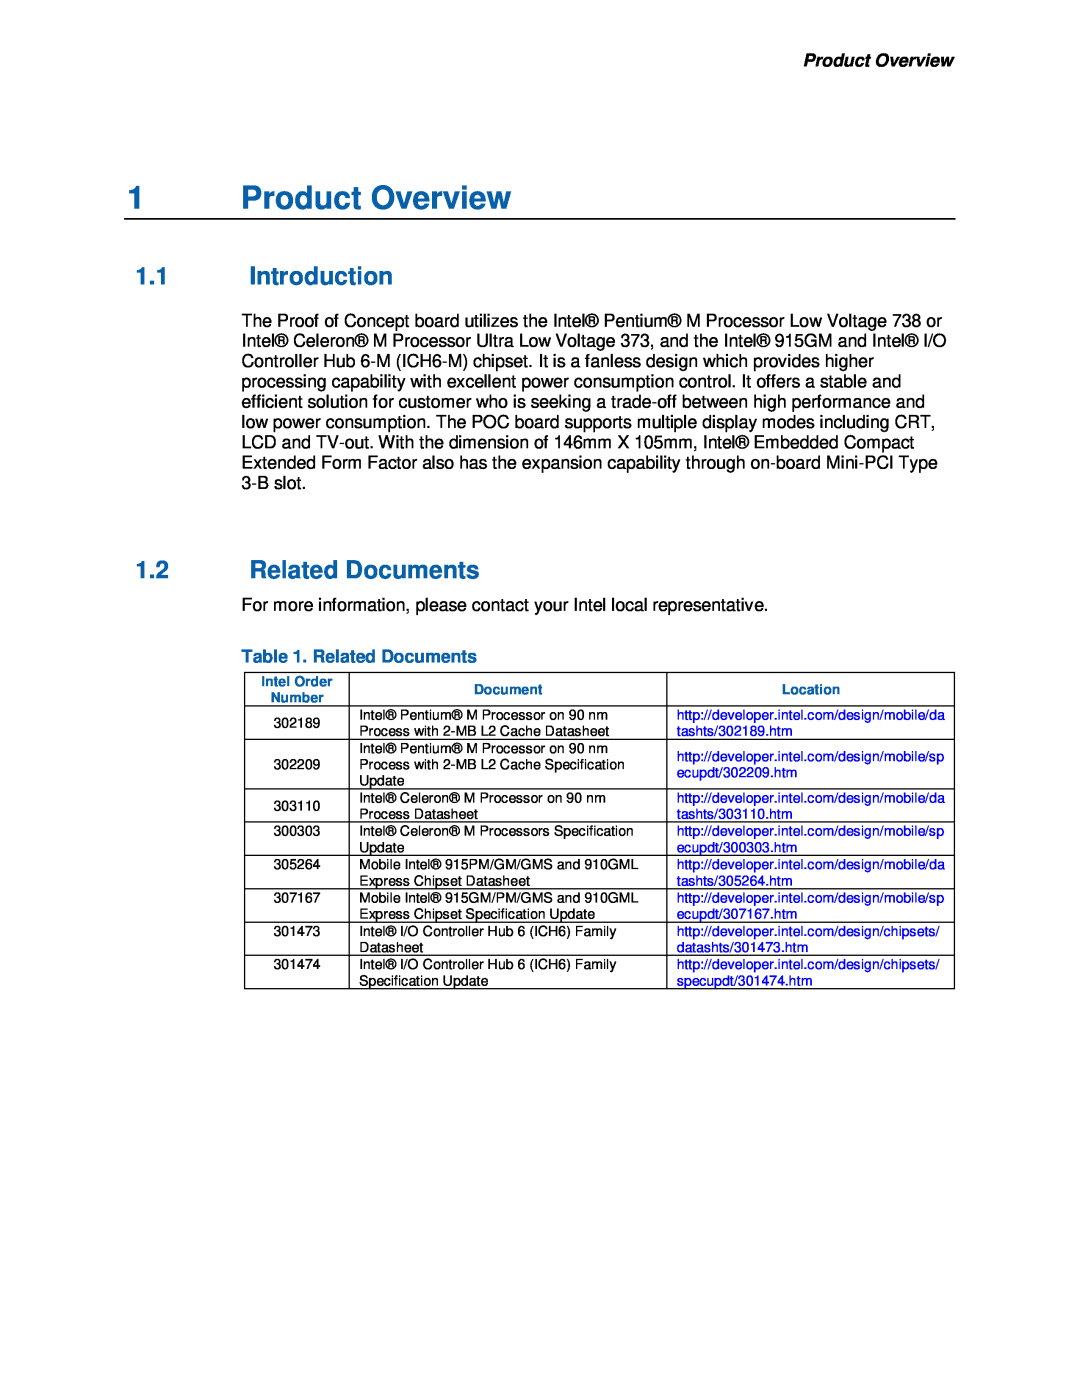 Intel 915GM user manual 1.1Introduction, 1.2Related Documents, 1Product Overview 